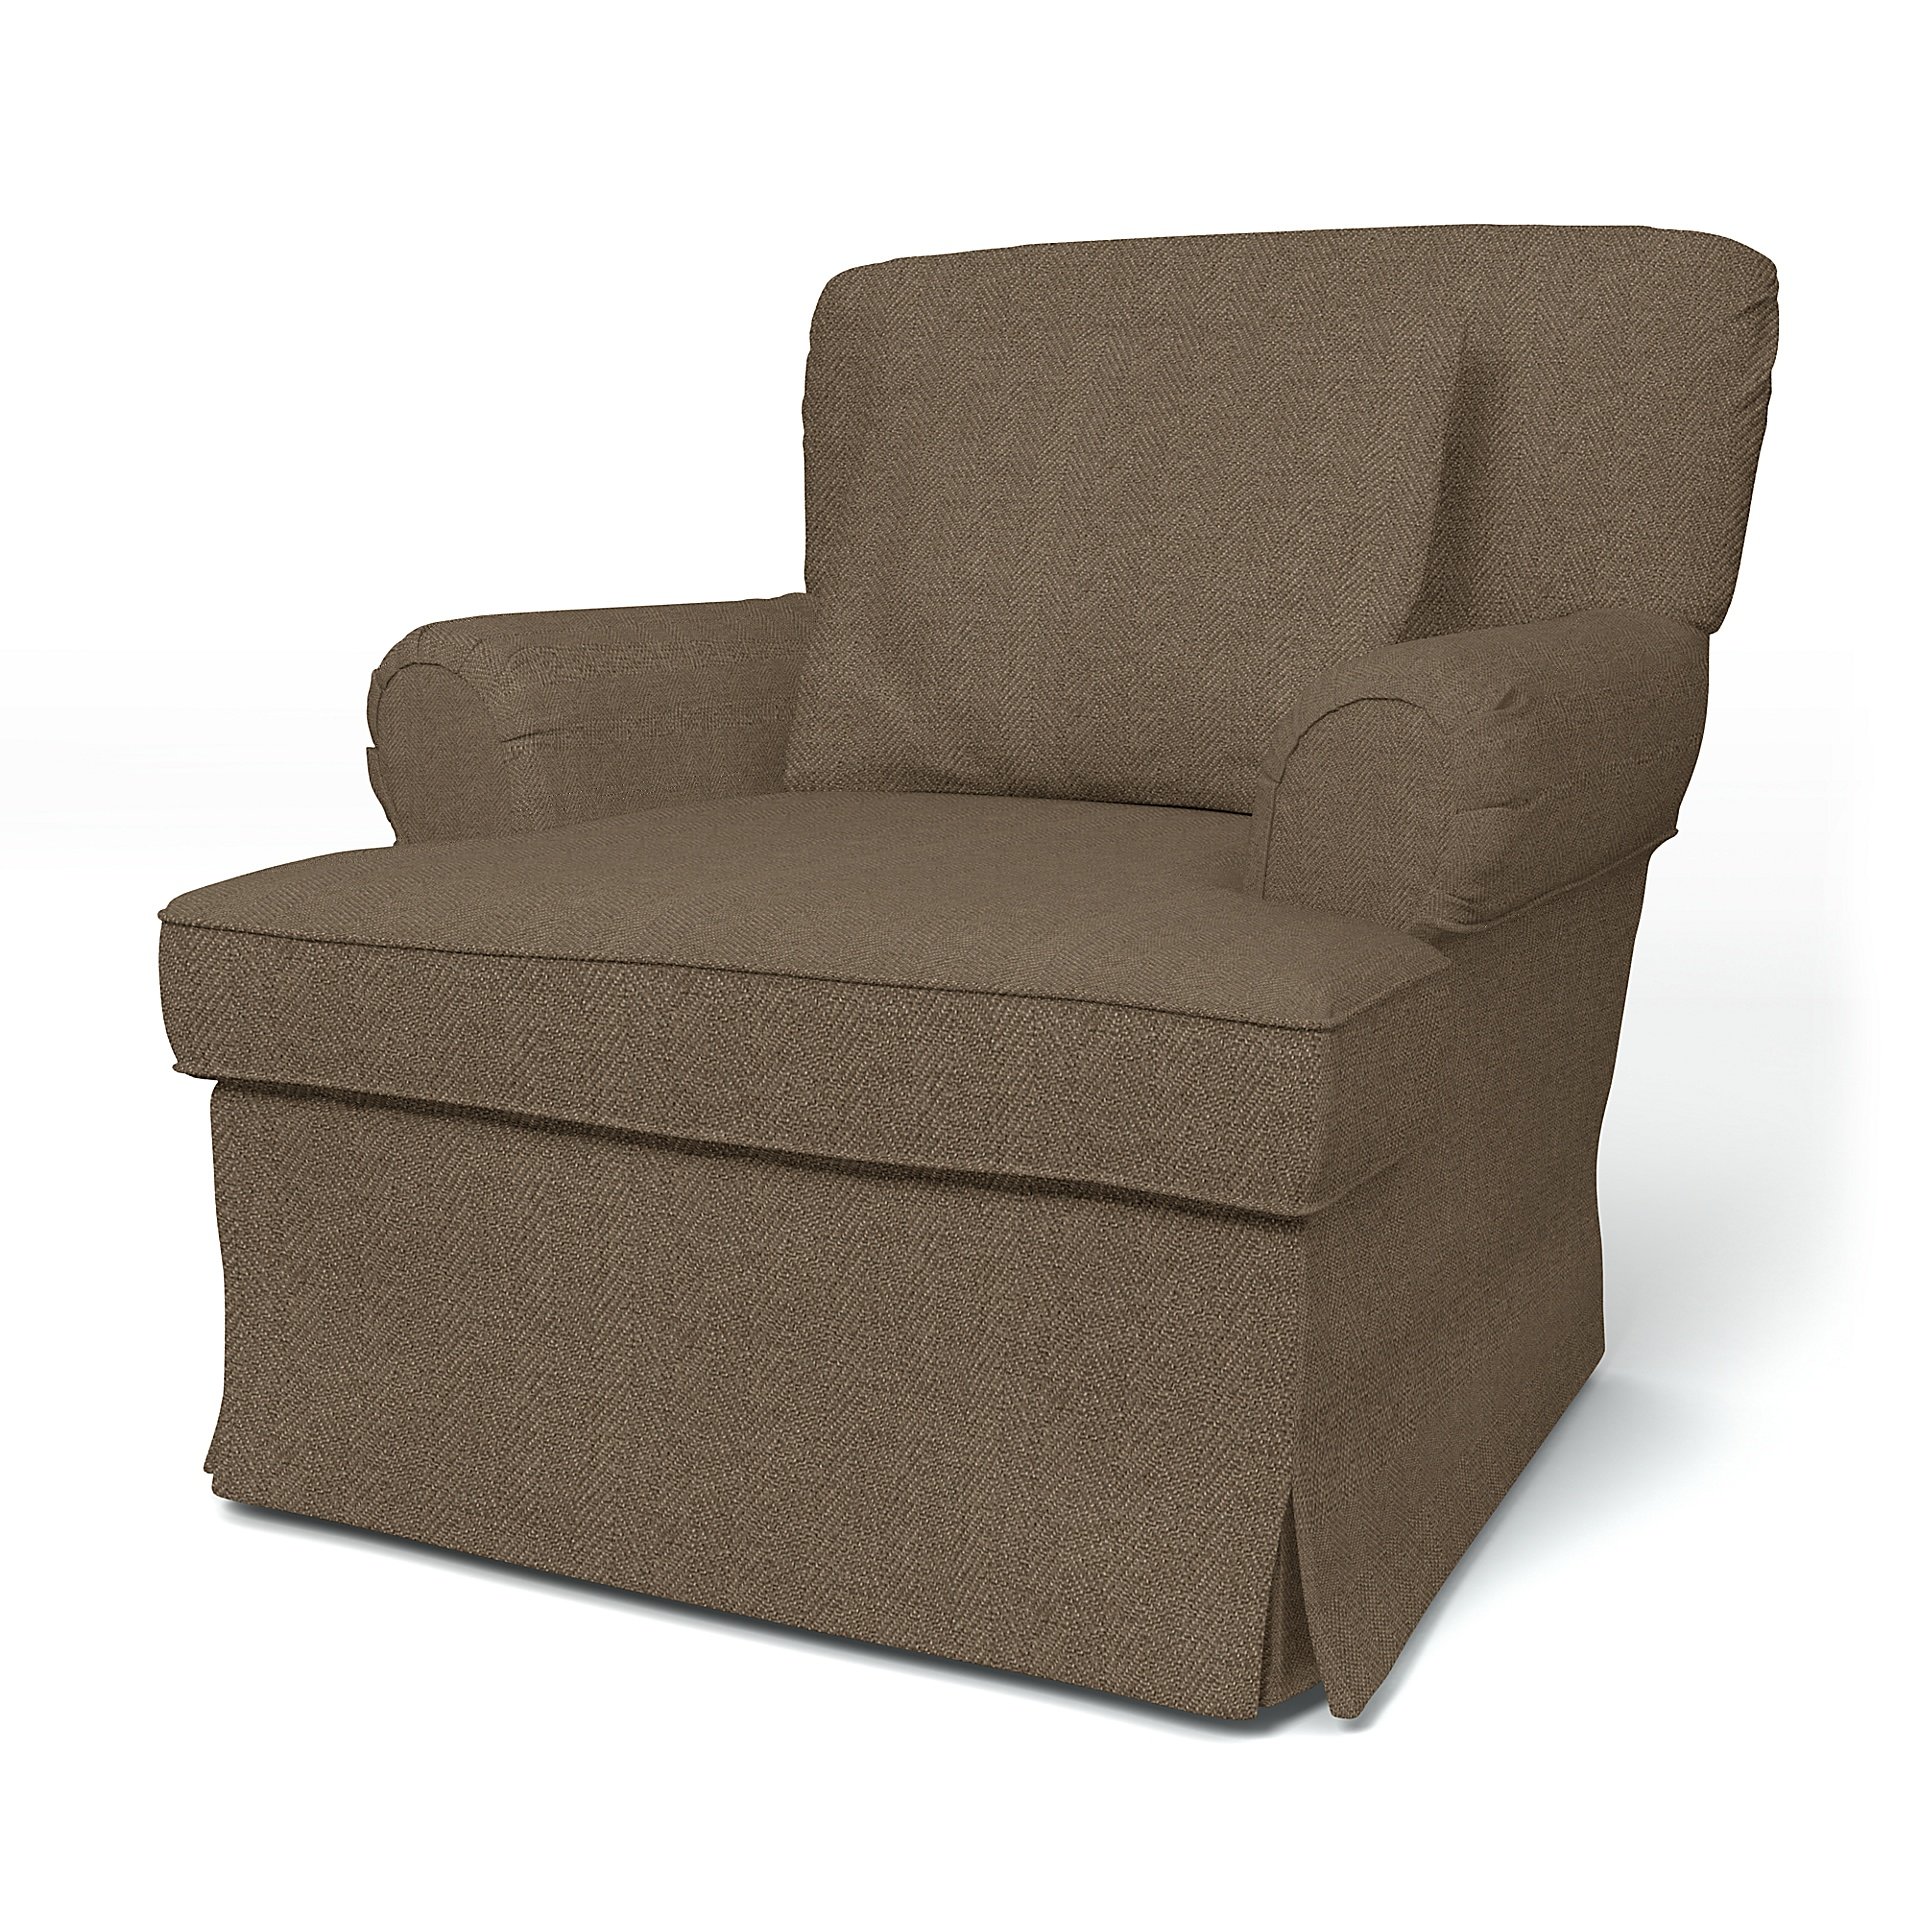 IKEA - Stockholm Armchair Cover (1994-2000) Standard, Dark Taupe, Boucle & Texture - Bemz